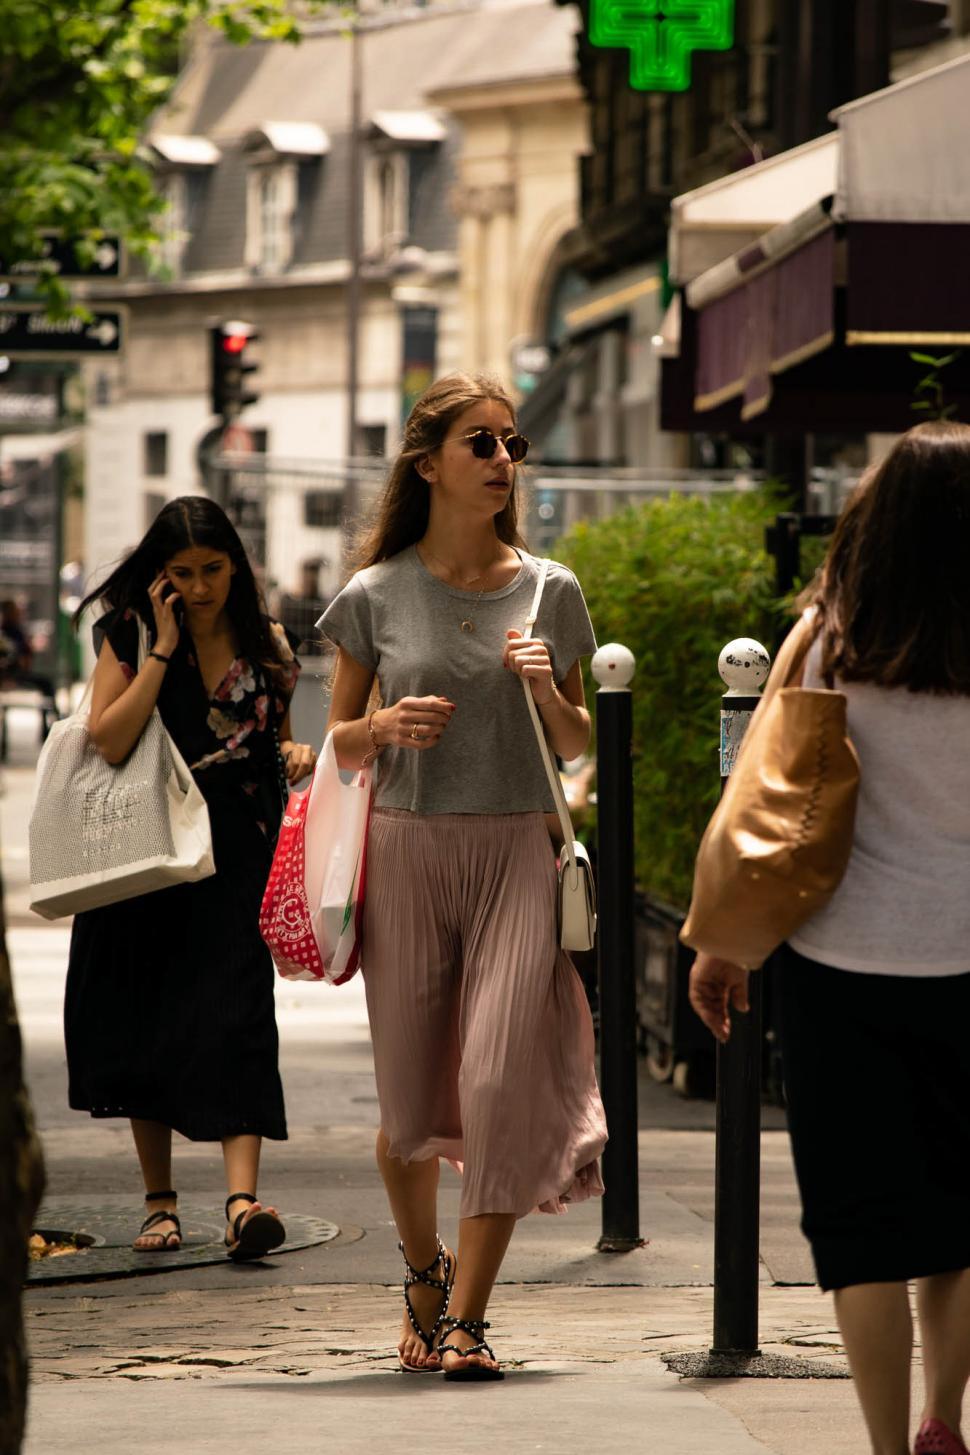 Free Image of Women on the street 